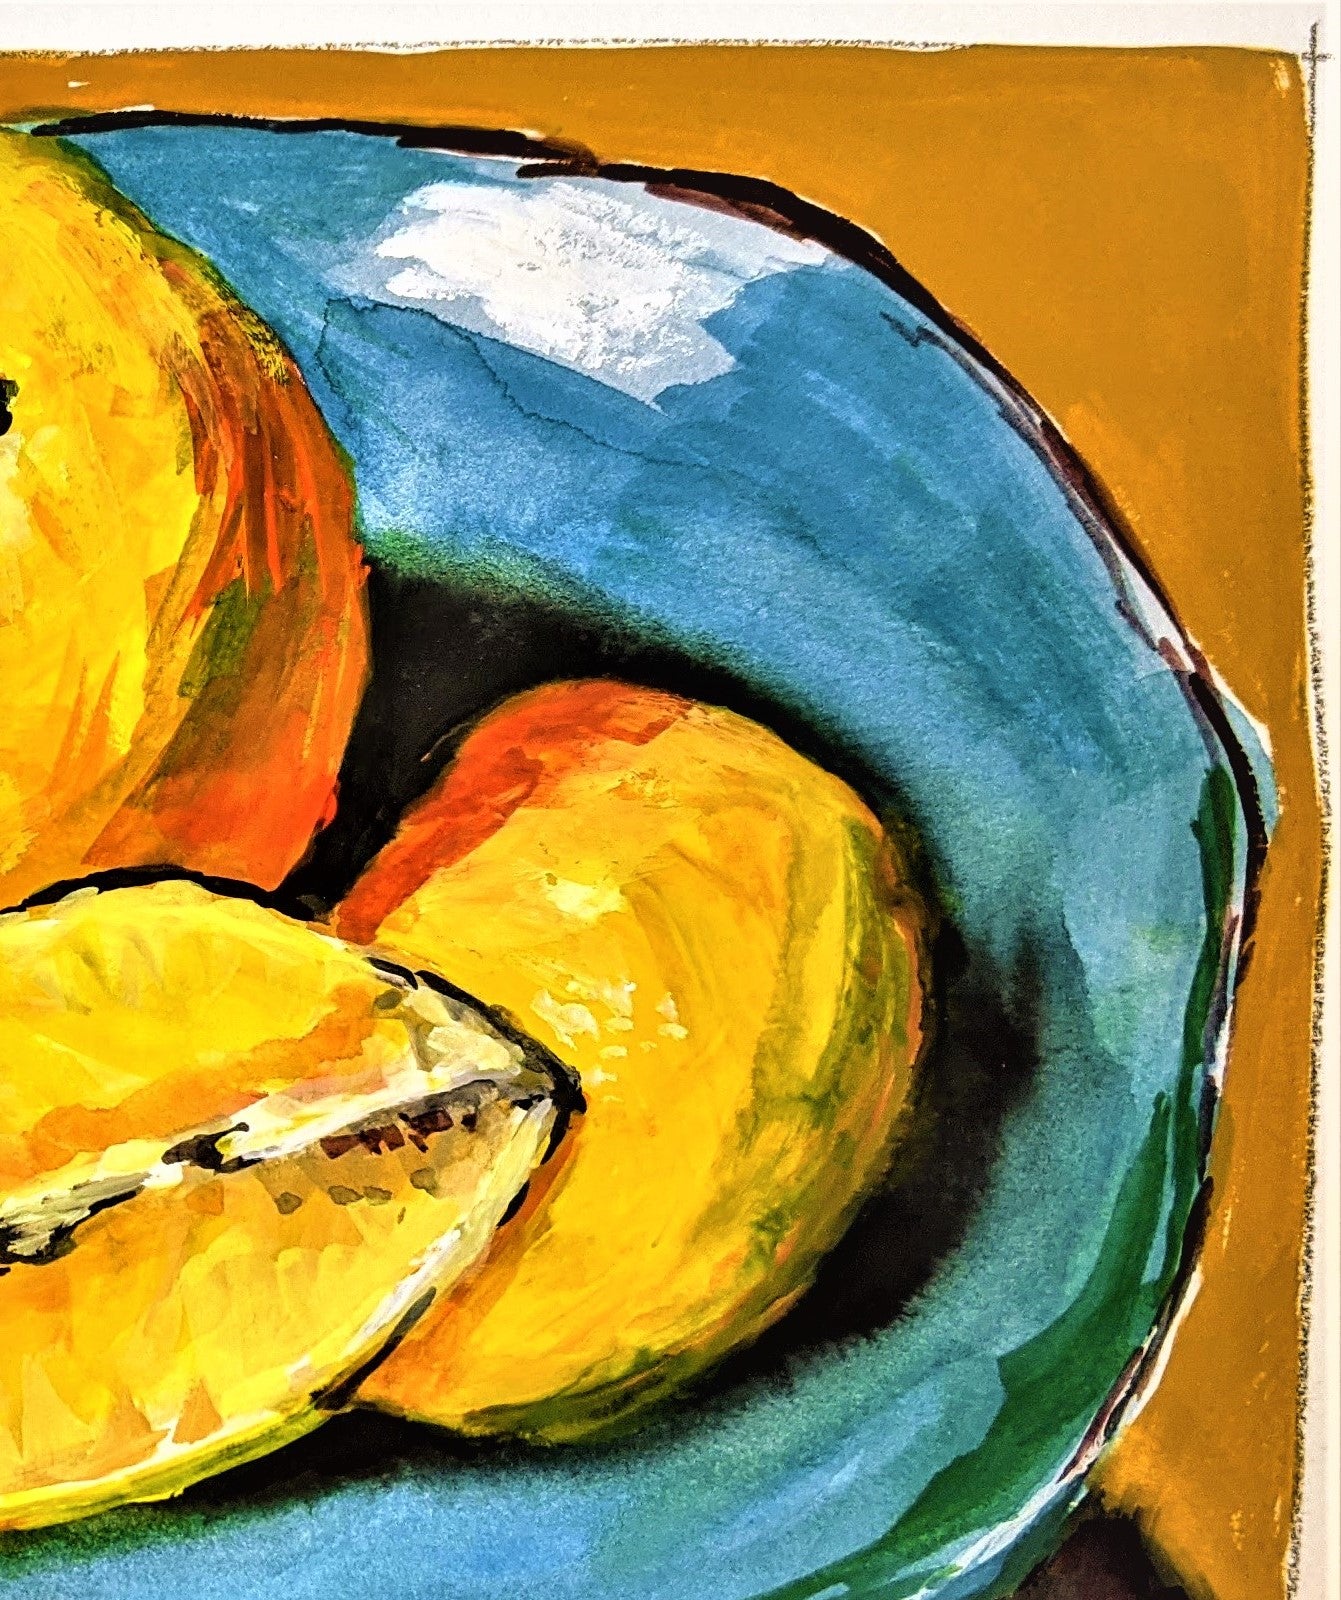 Lemons on Turquoise gouache painting on paper detail